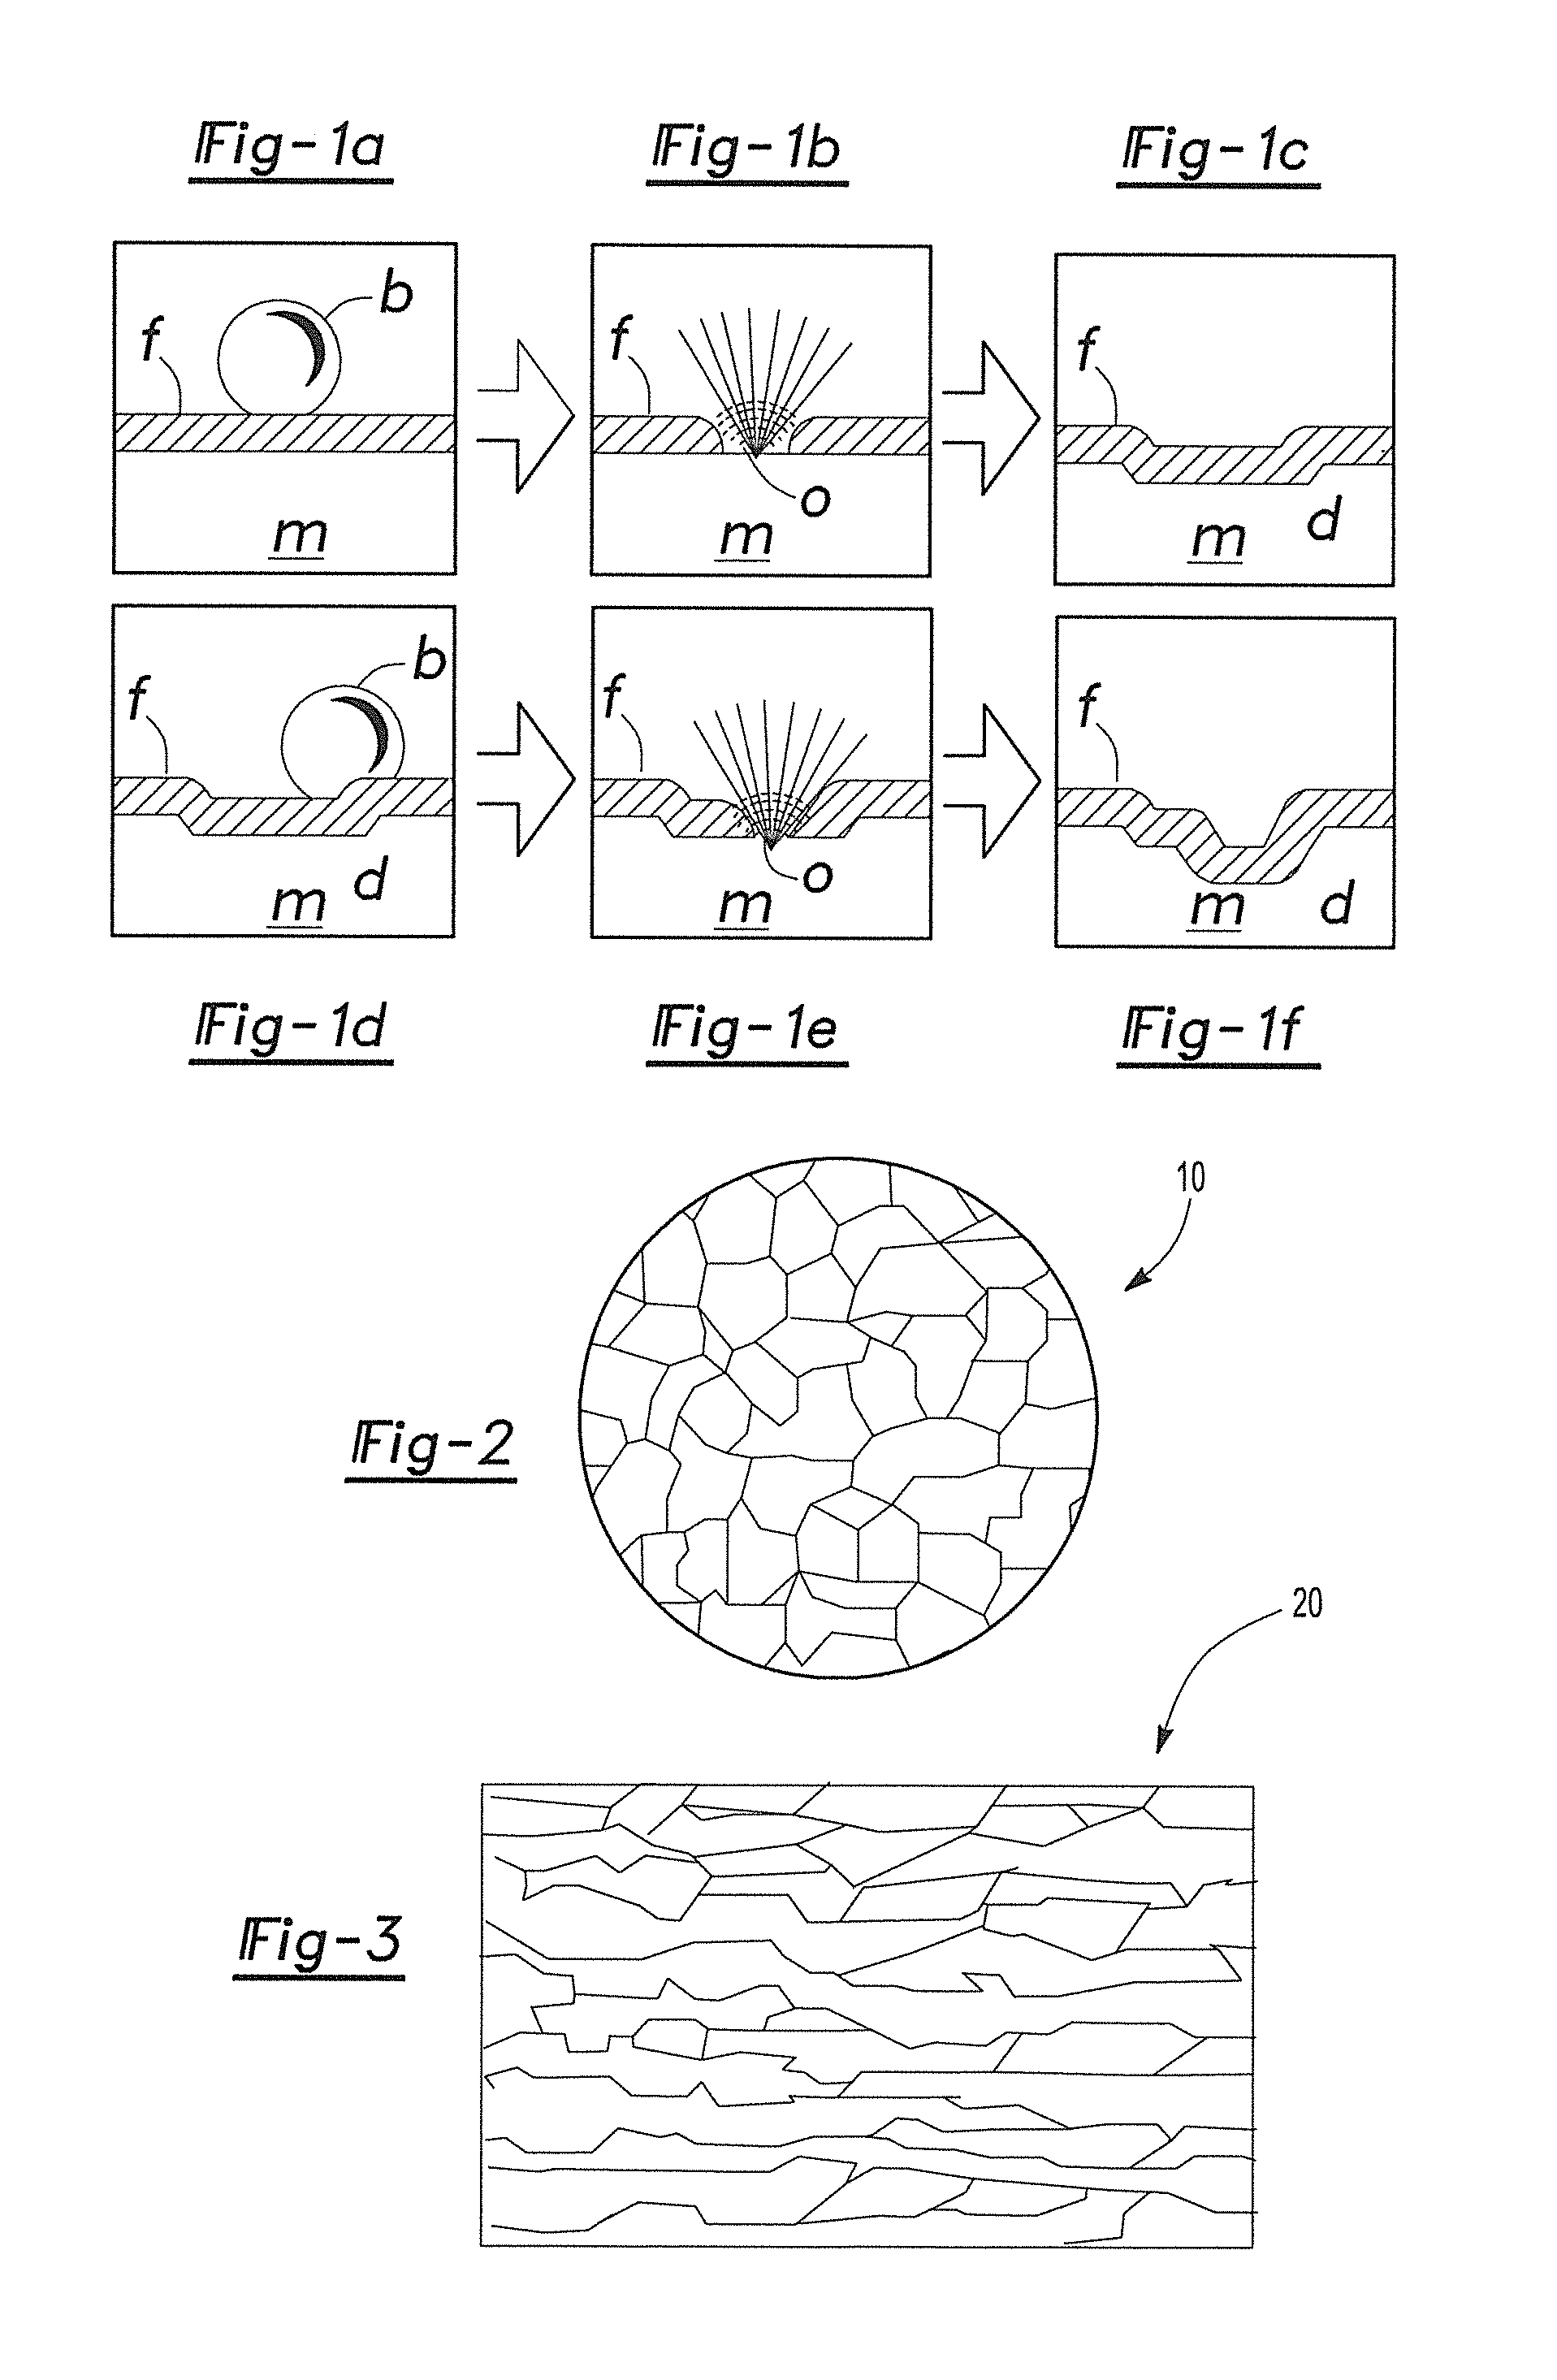 Process for design and manufacture of cavitation erosion resistant components